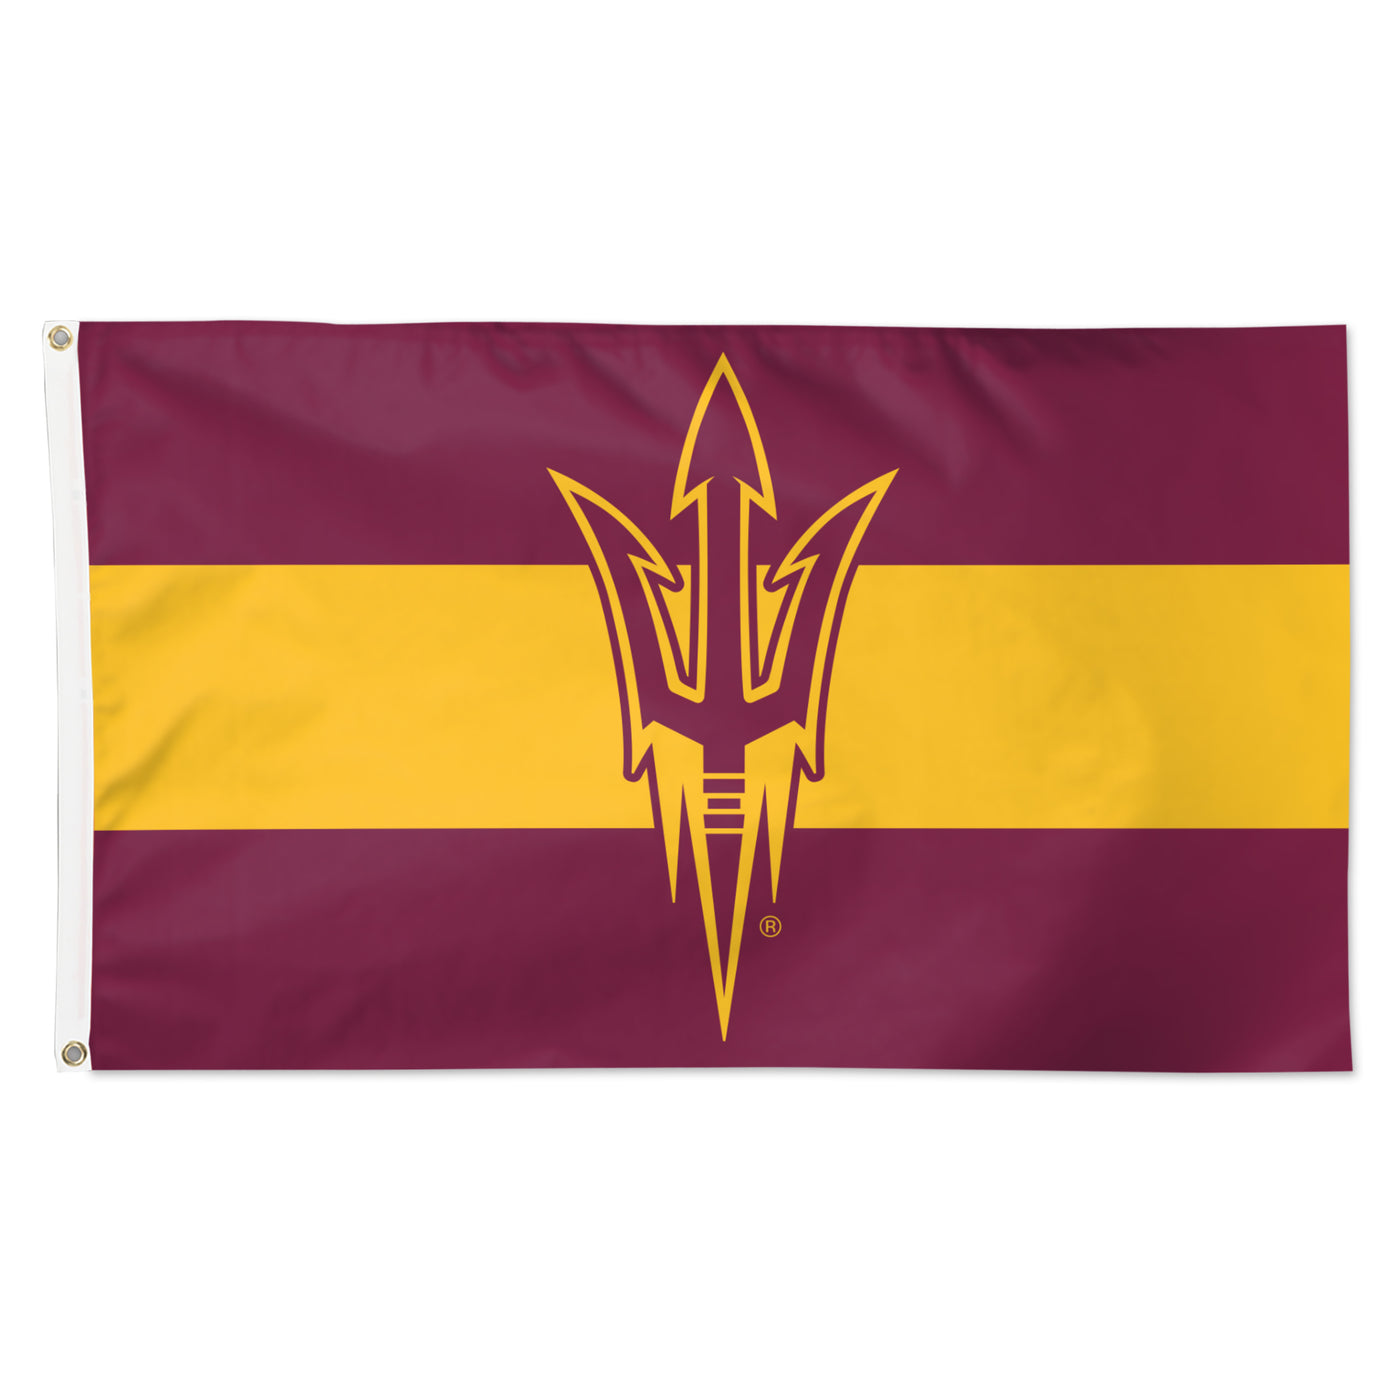 ASU maroon and gold striped flag with maroon and gold outline pitchfork logo in the center. 